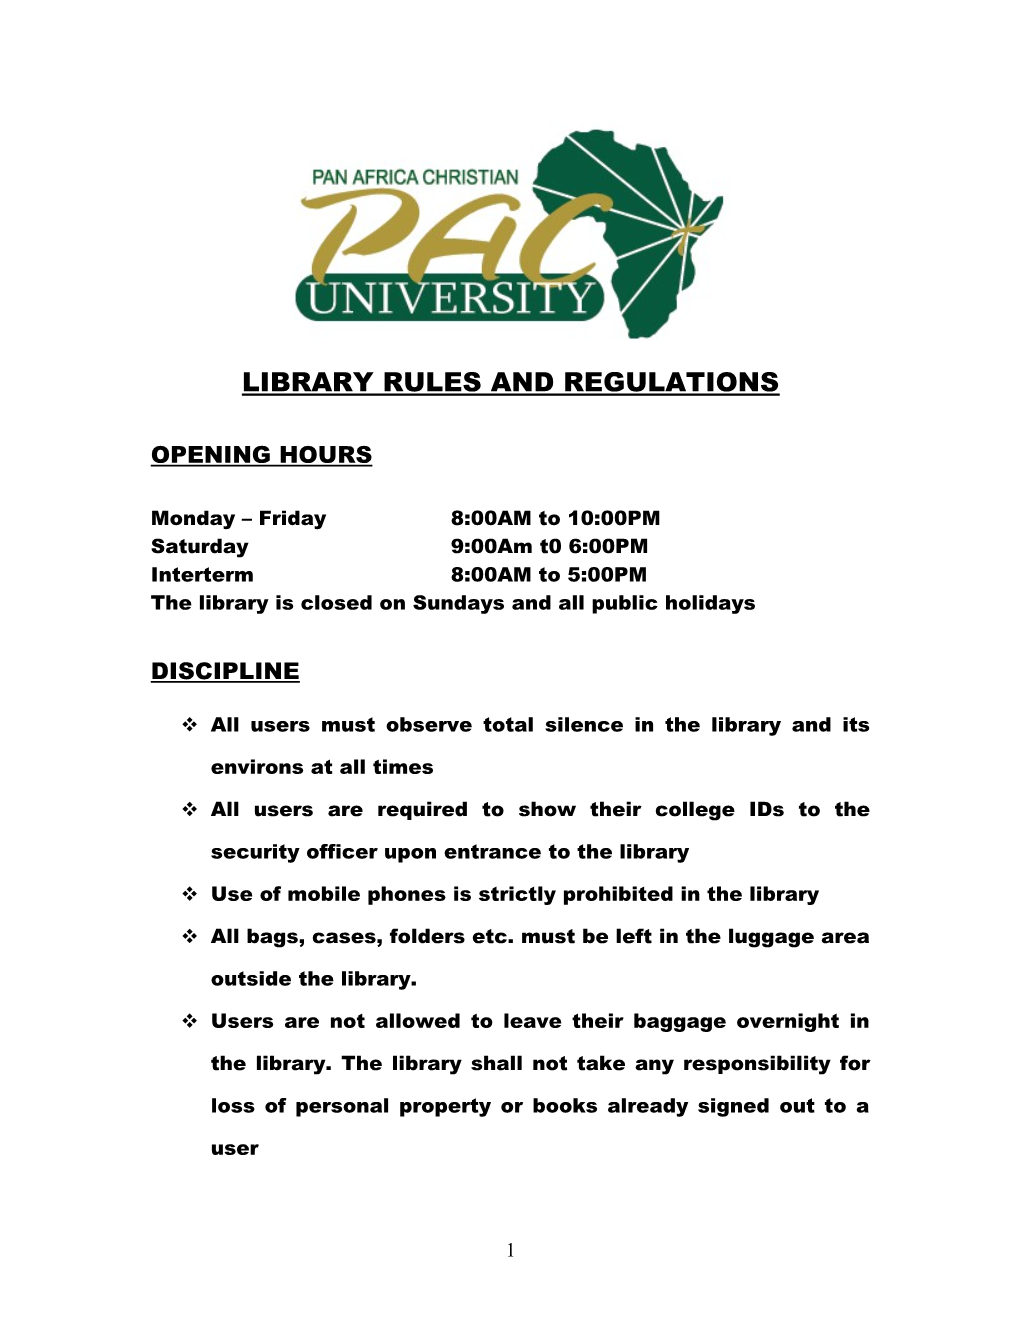 Library Rules and Regulations